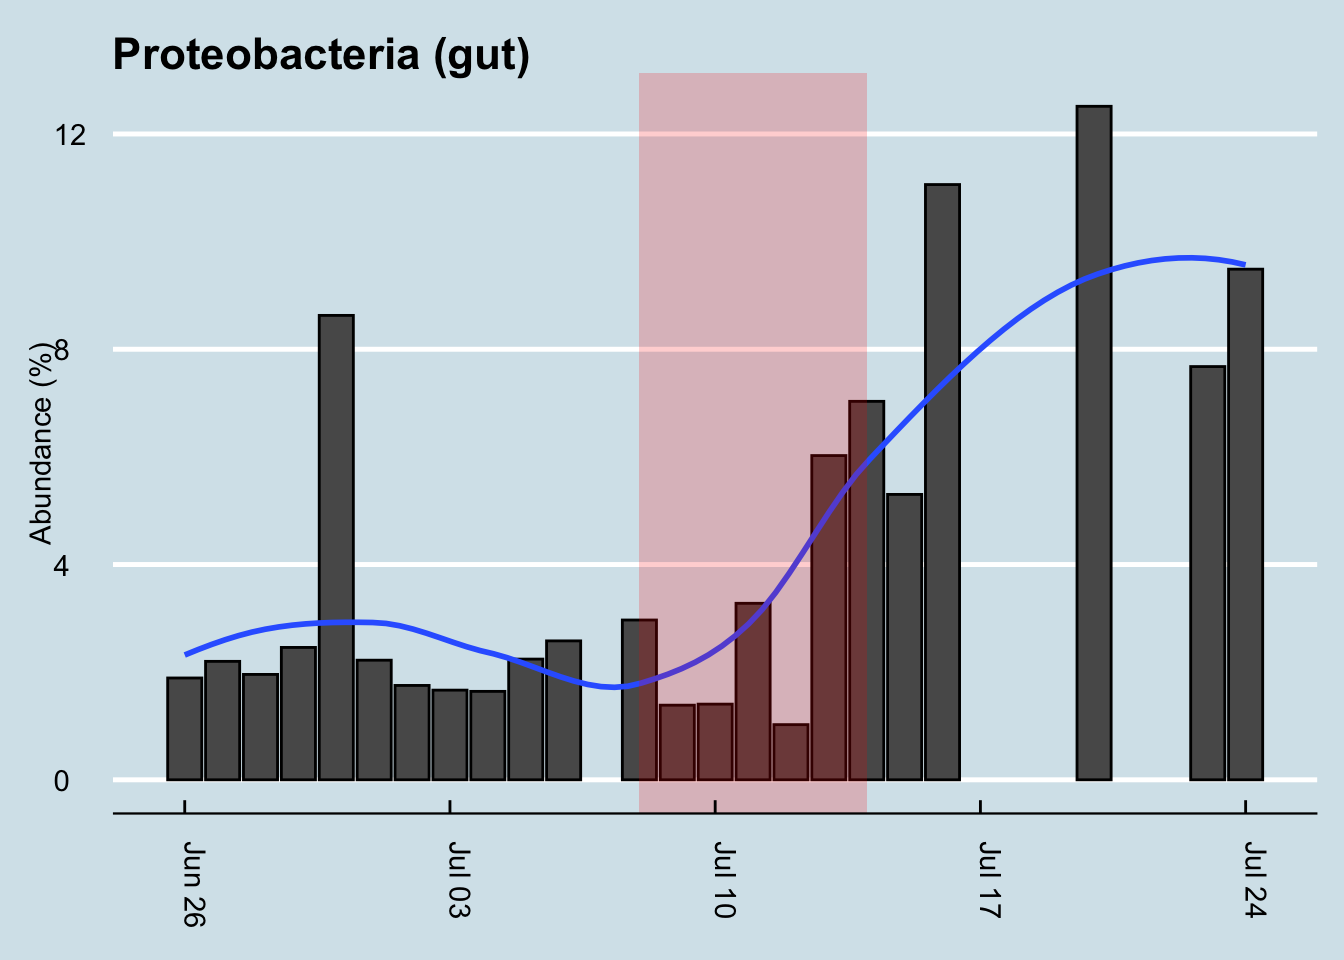 Gut Proteobacteria abundances rose during a period of heavy travel. Note: zero abundances are days with no samples available.